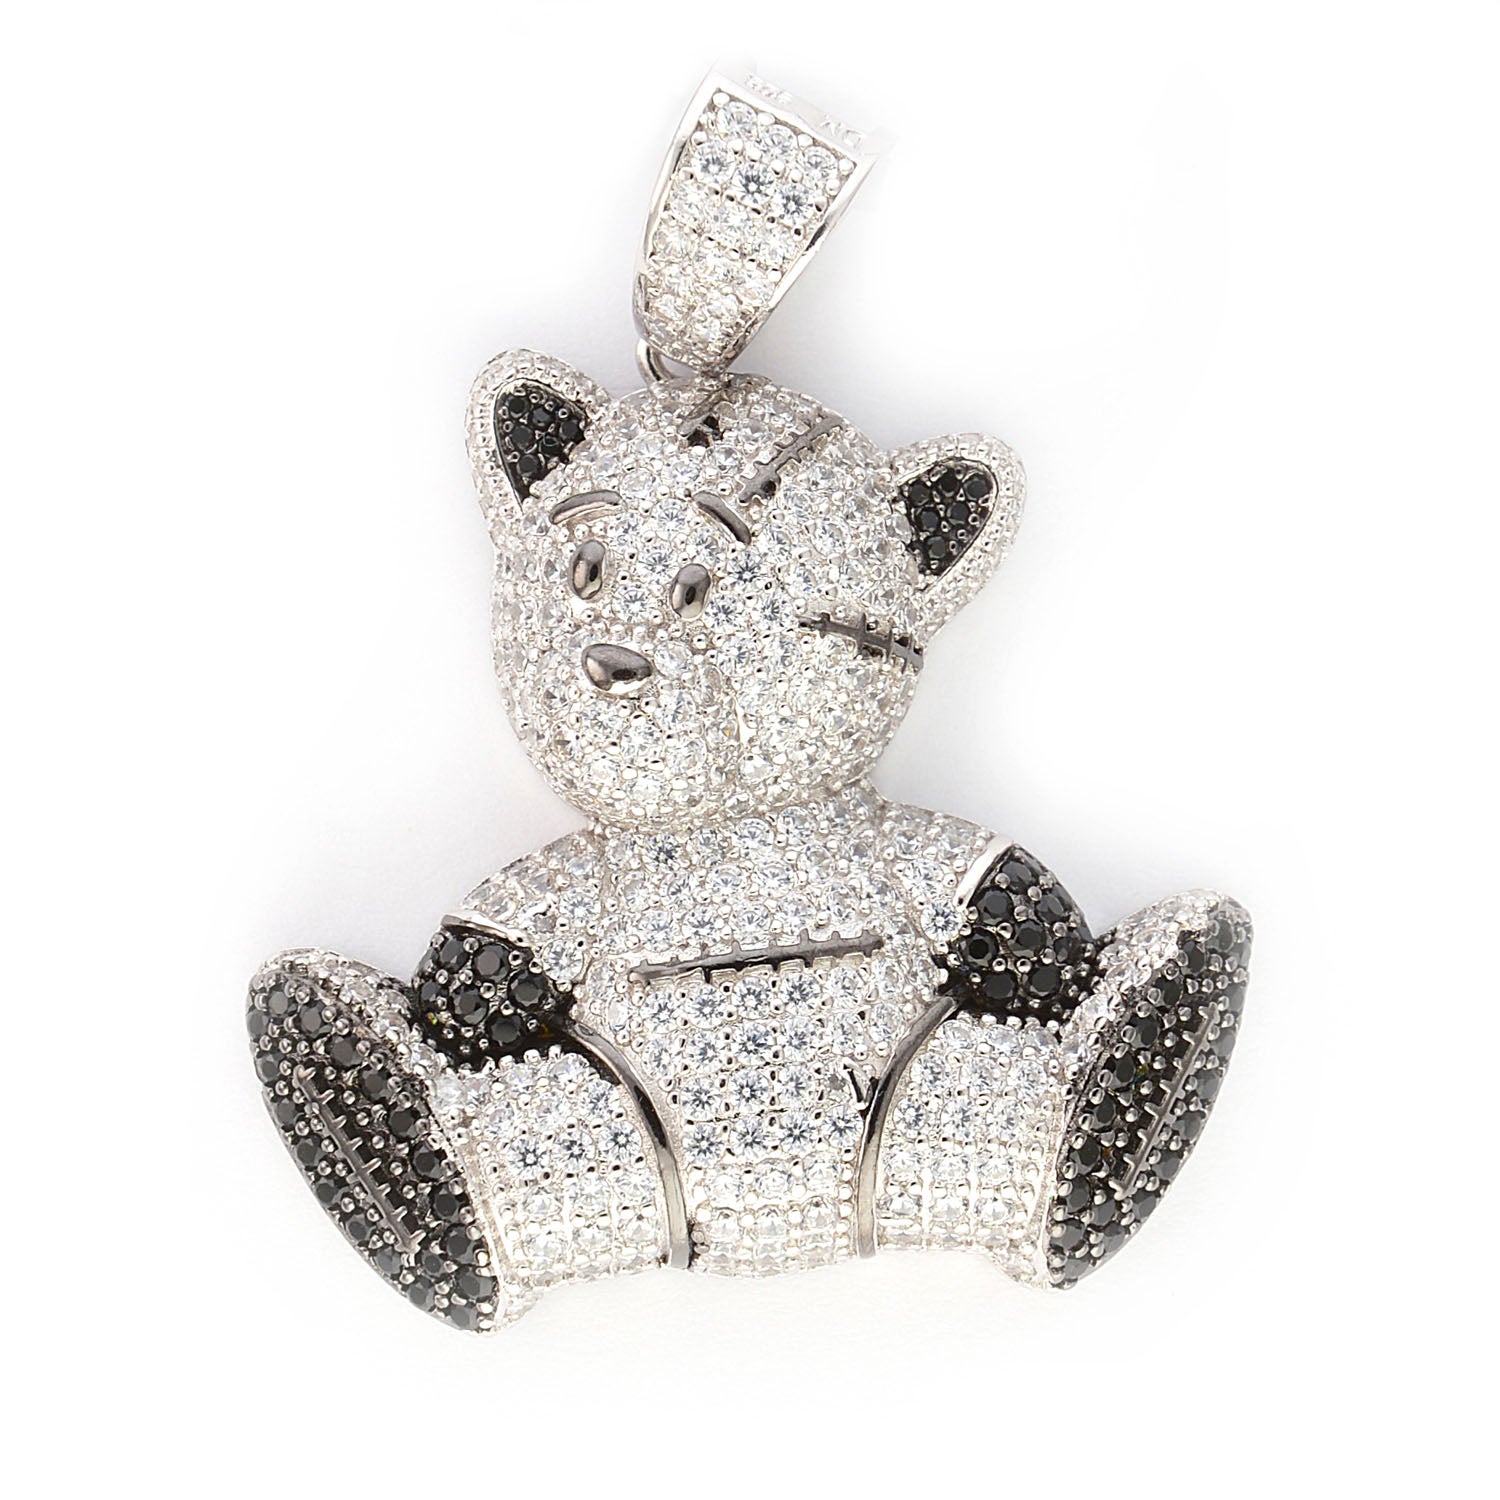 Teddy Bear Pendant: Silver or Gold - Iced Out Customs